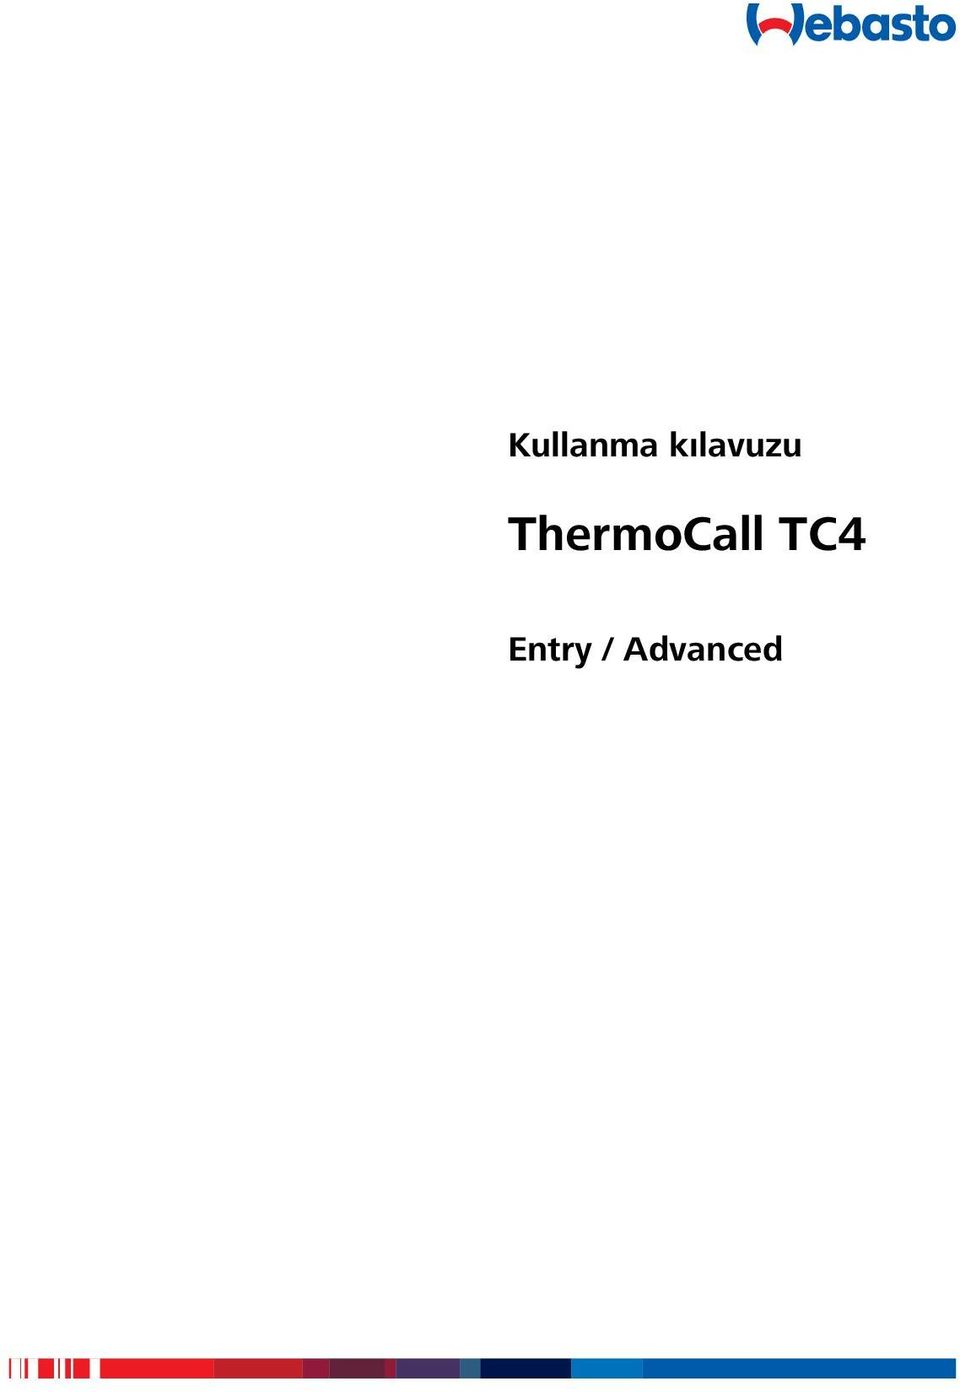 ThermoCall